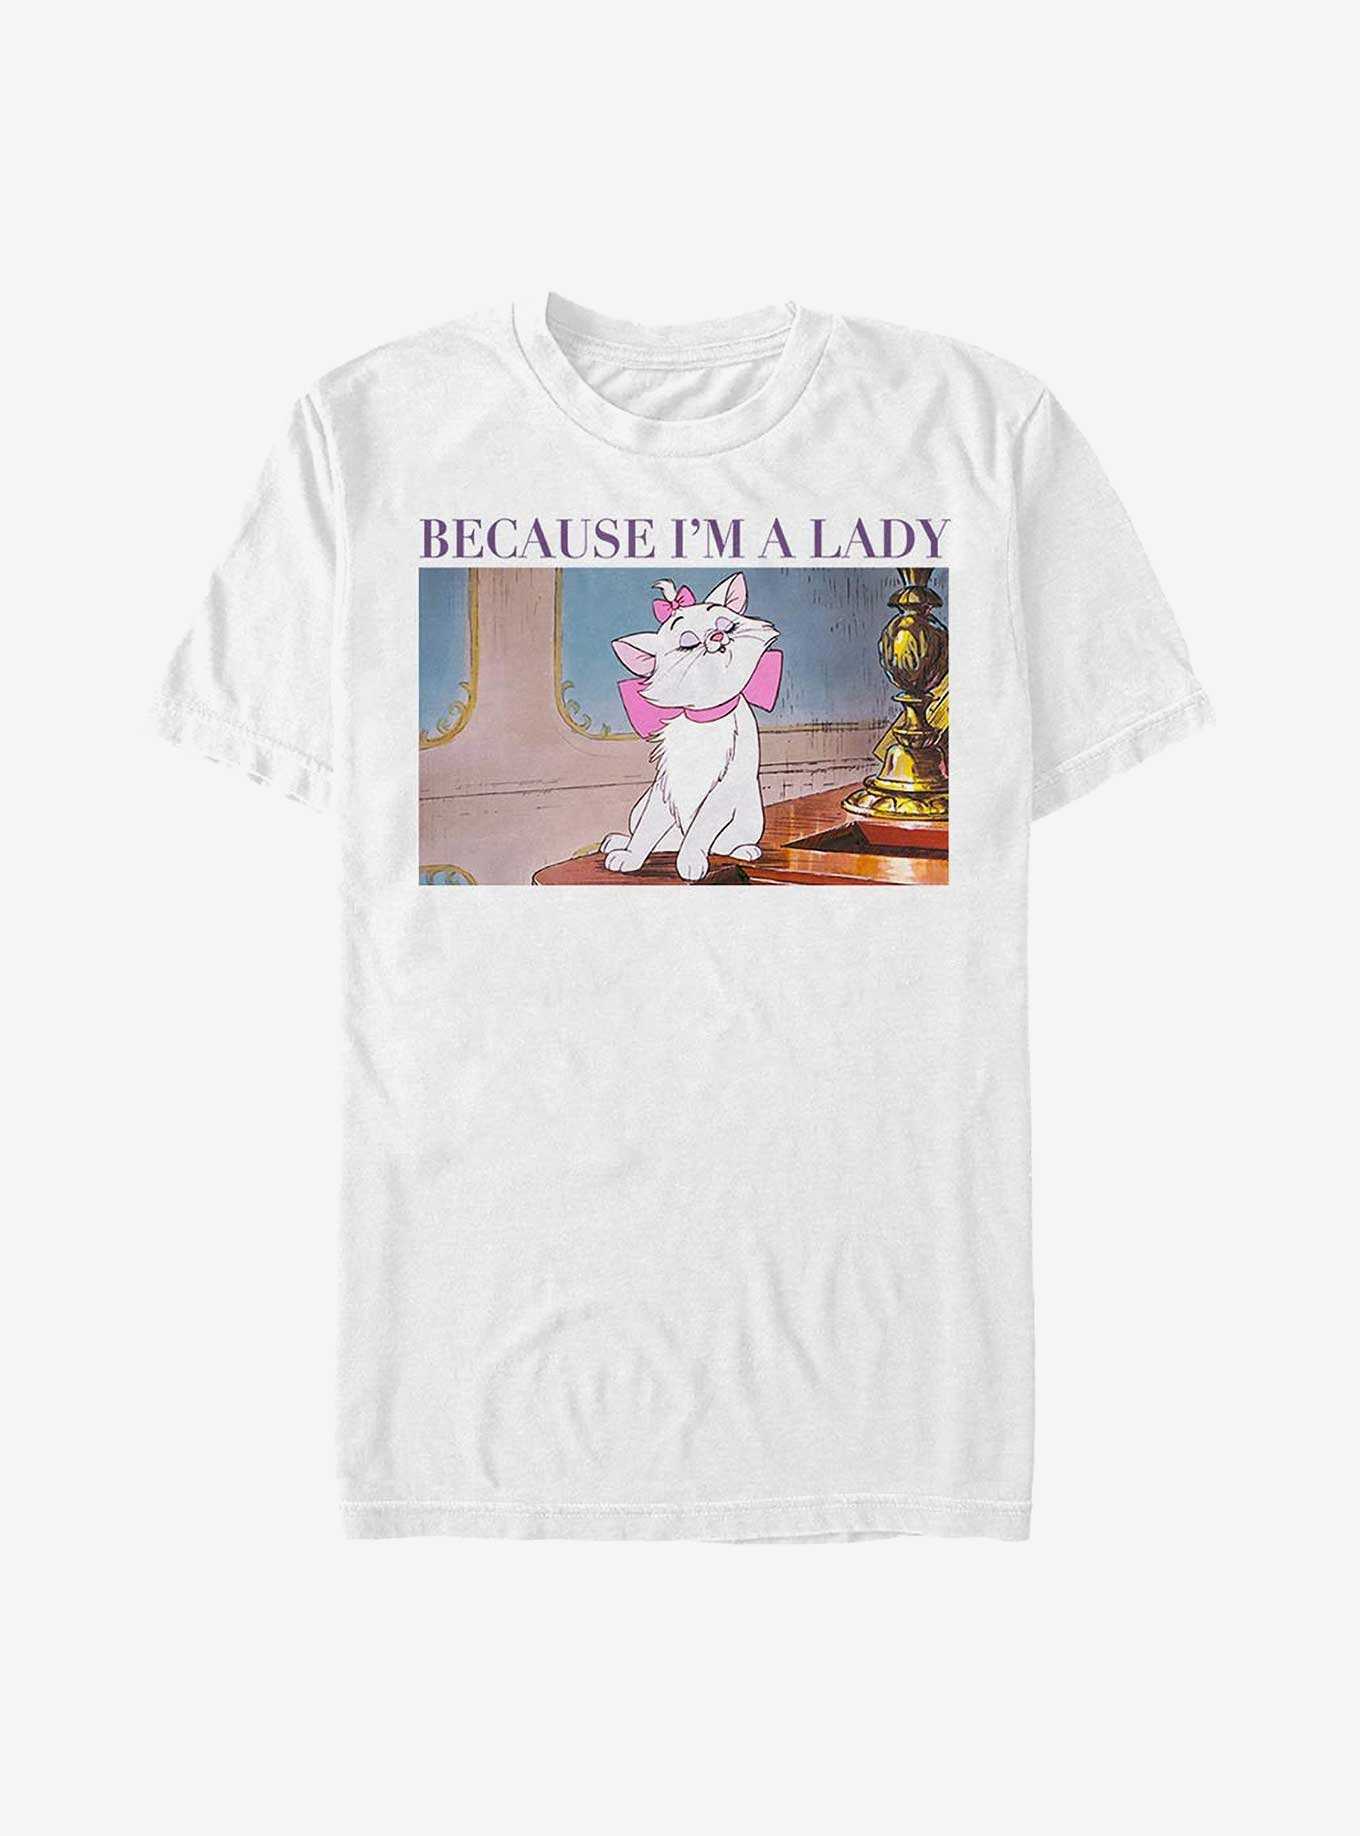 & Hot Shirts Plushies, OFFICIAL Merch Topic Aristocats |